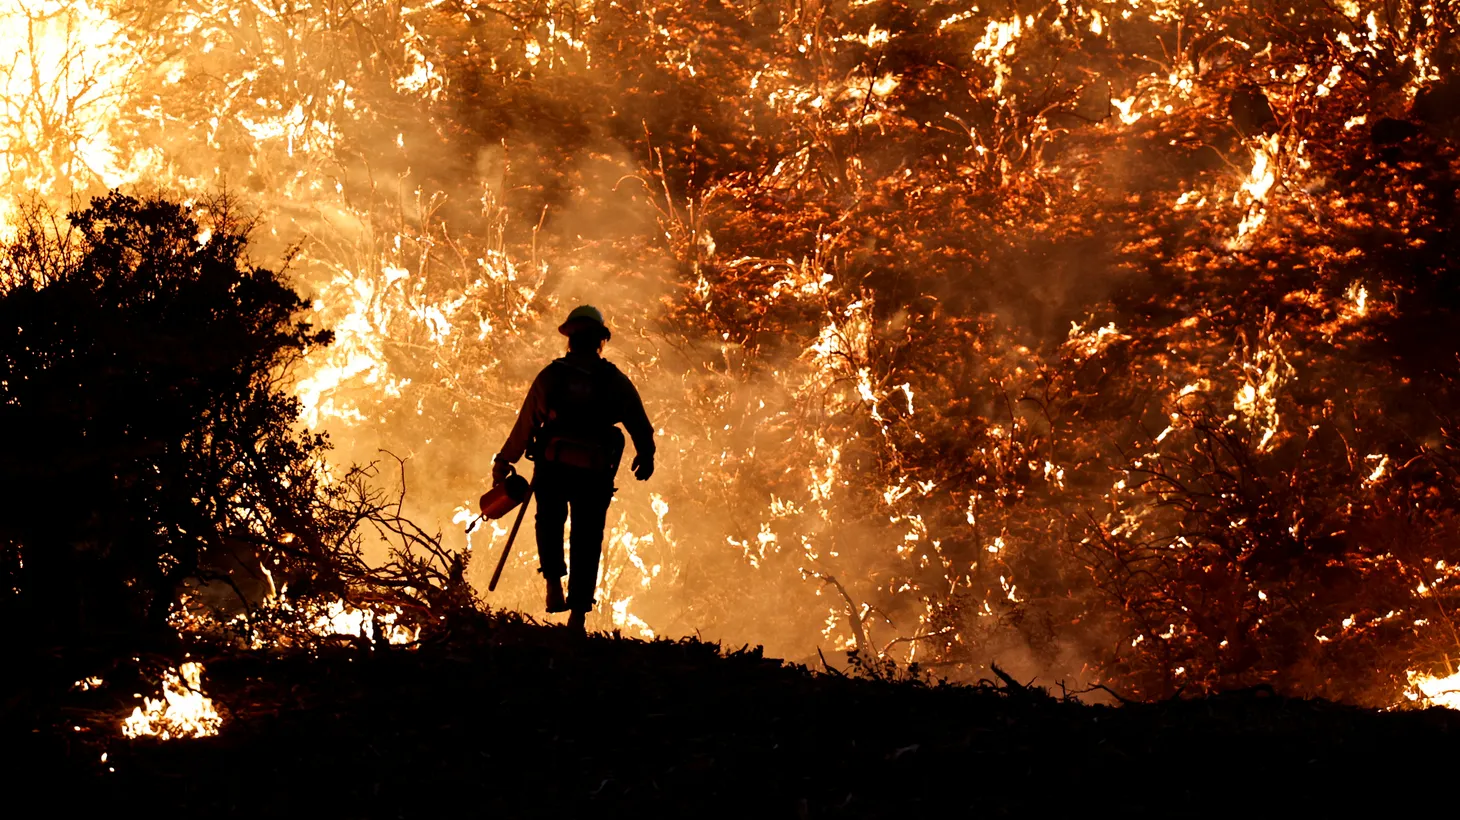 A firefighter works as the Caldor Fire burns in Grizzly Flats, California, U.S., on August 22, 2021.